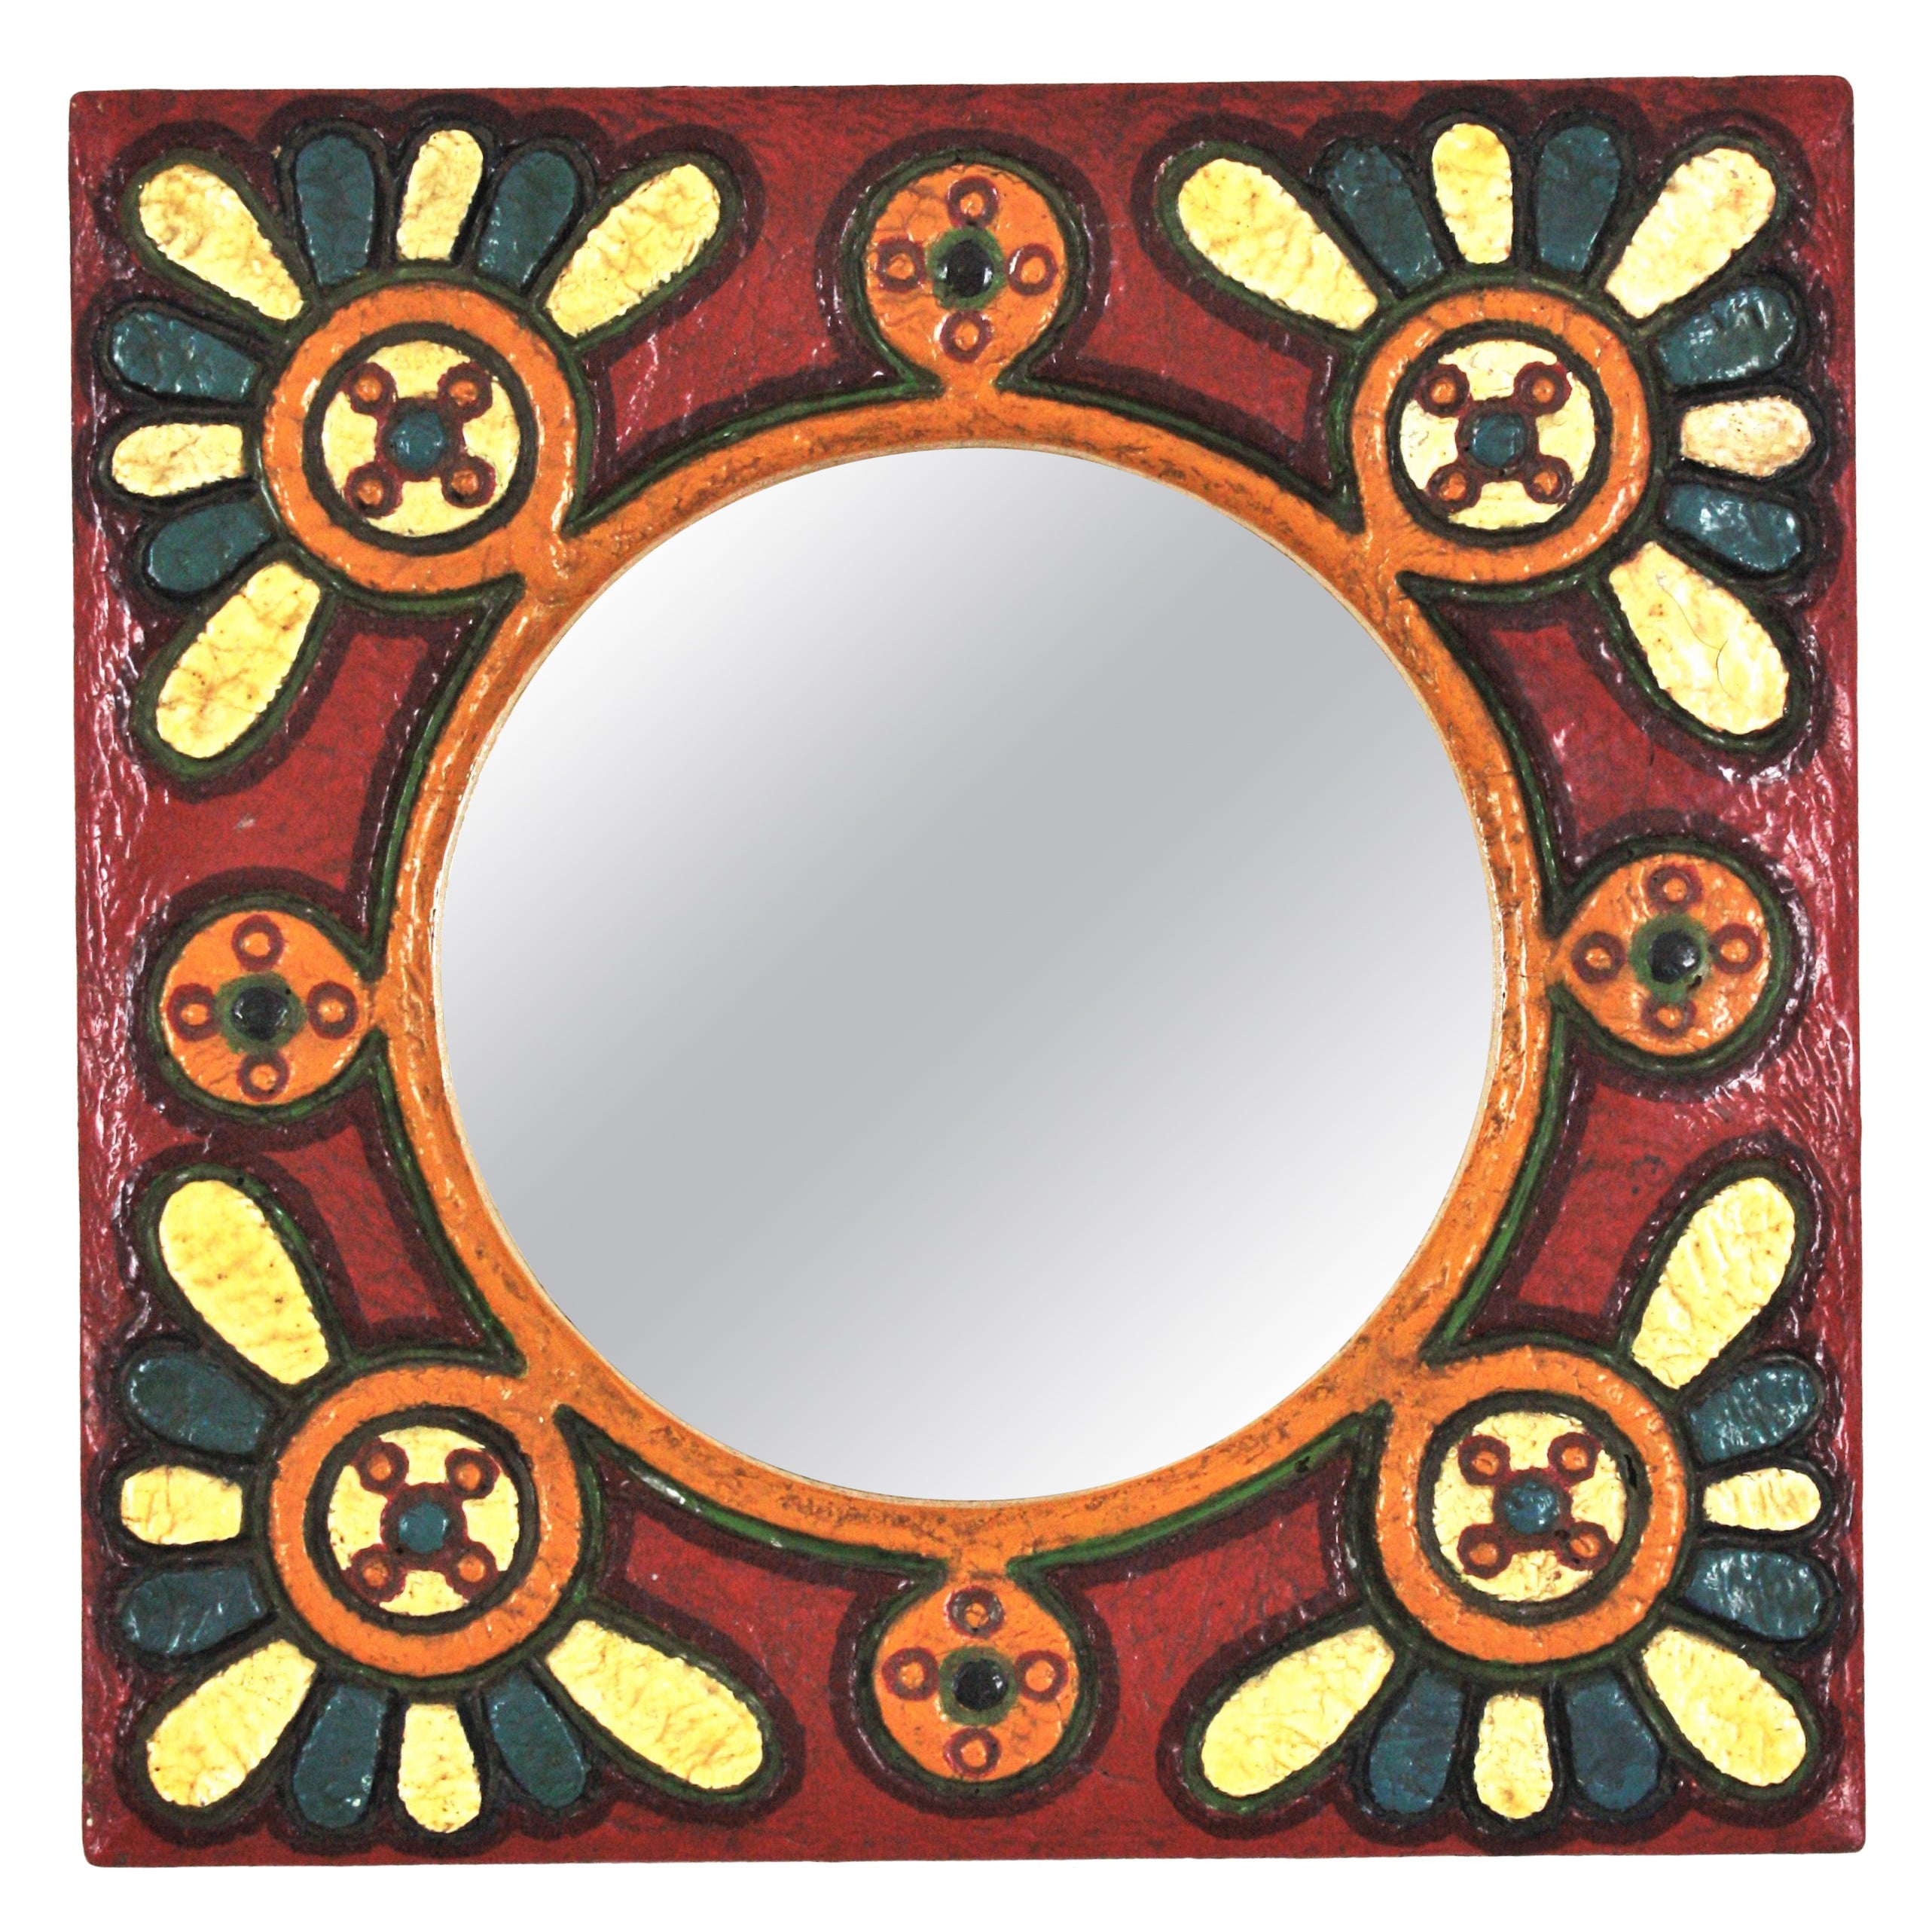 Spanish Colorful Wooden Wall Mirror with Flowers Motif